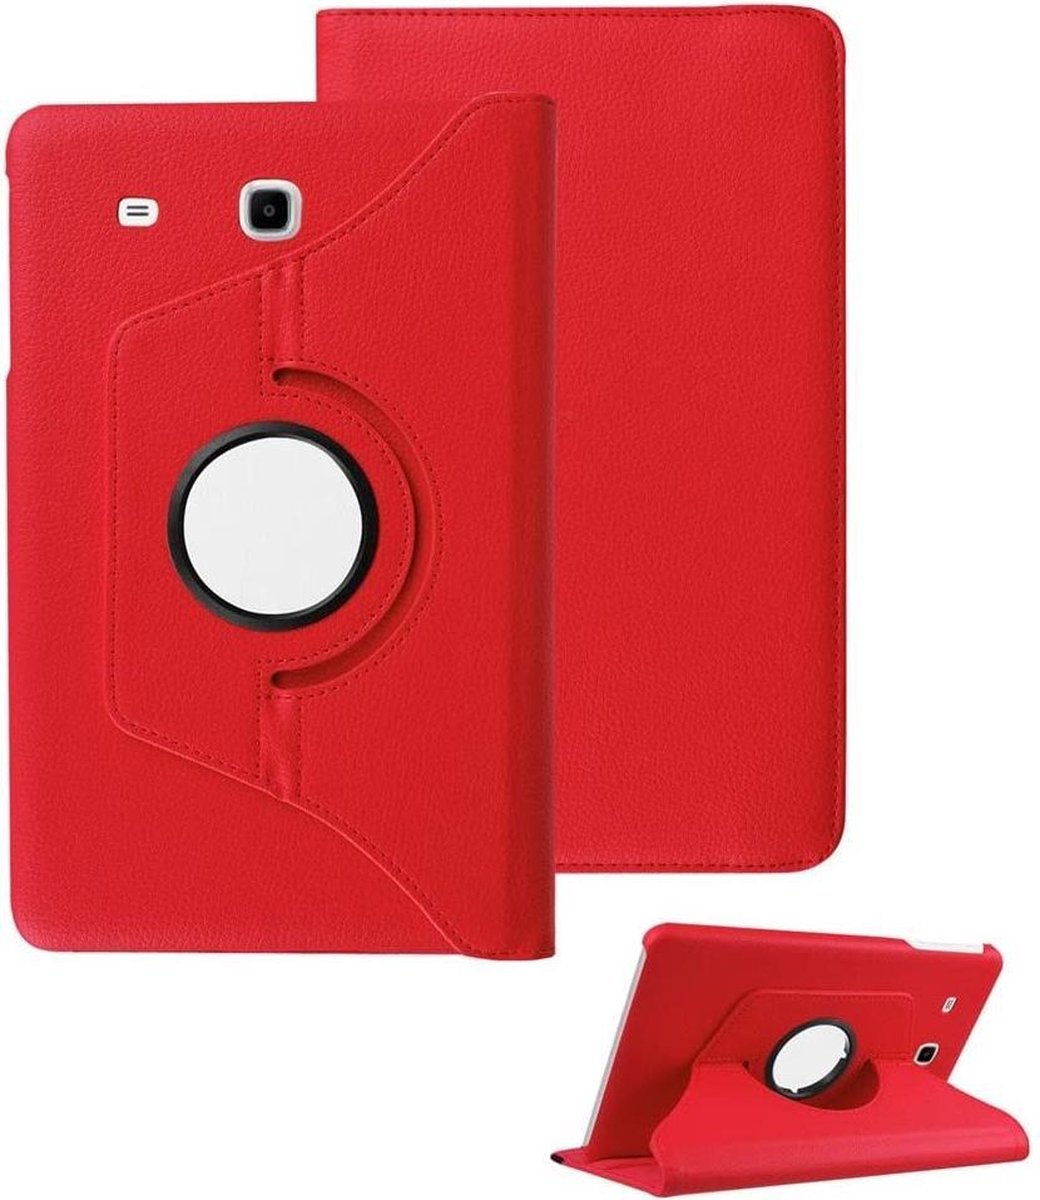 Samsung Tab E 9.6 Hoesje - Draaibare Tab E 9.6 Hoes Case Cover voor de Samsung Galaxy Tablet E (2015) - 9.6 inch - Rood